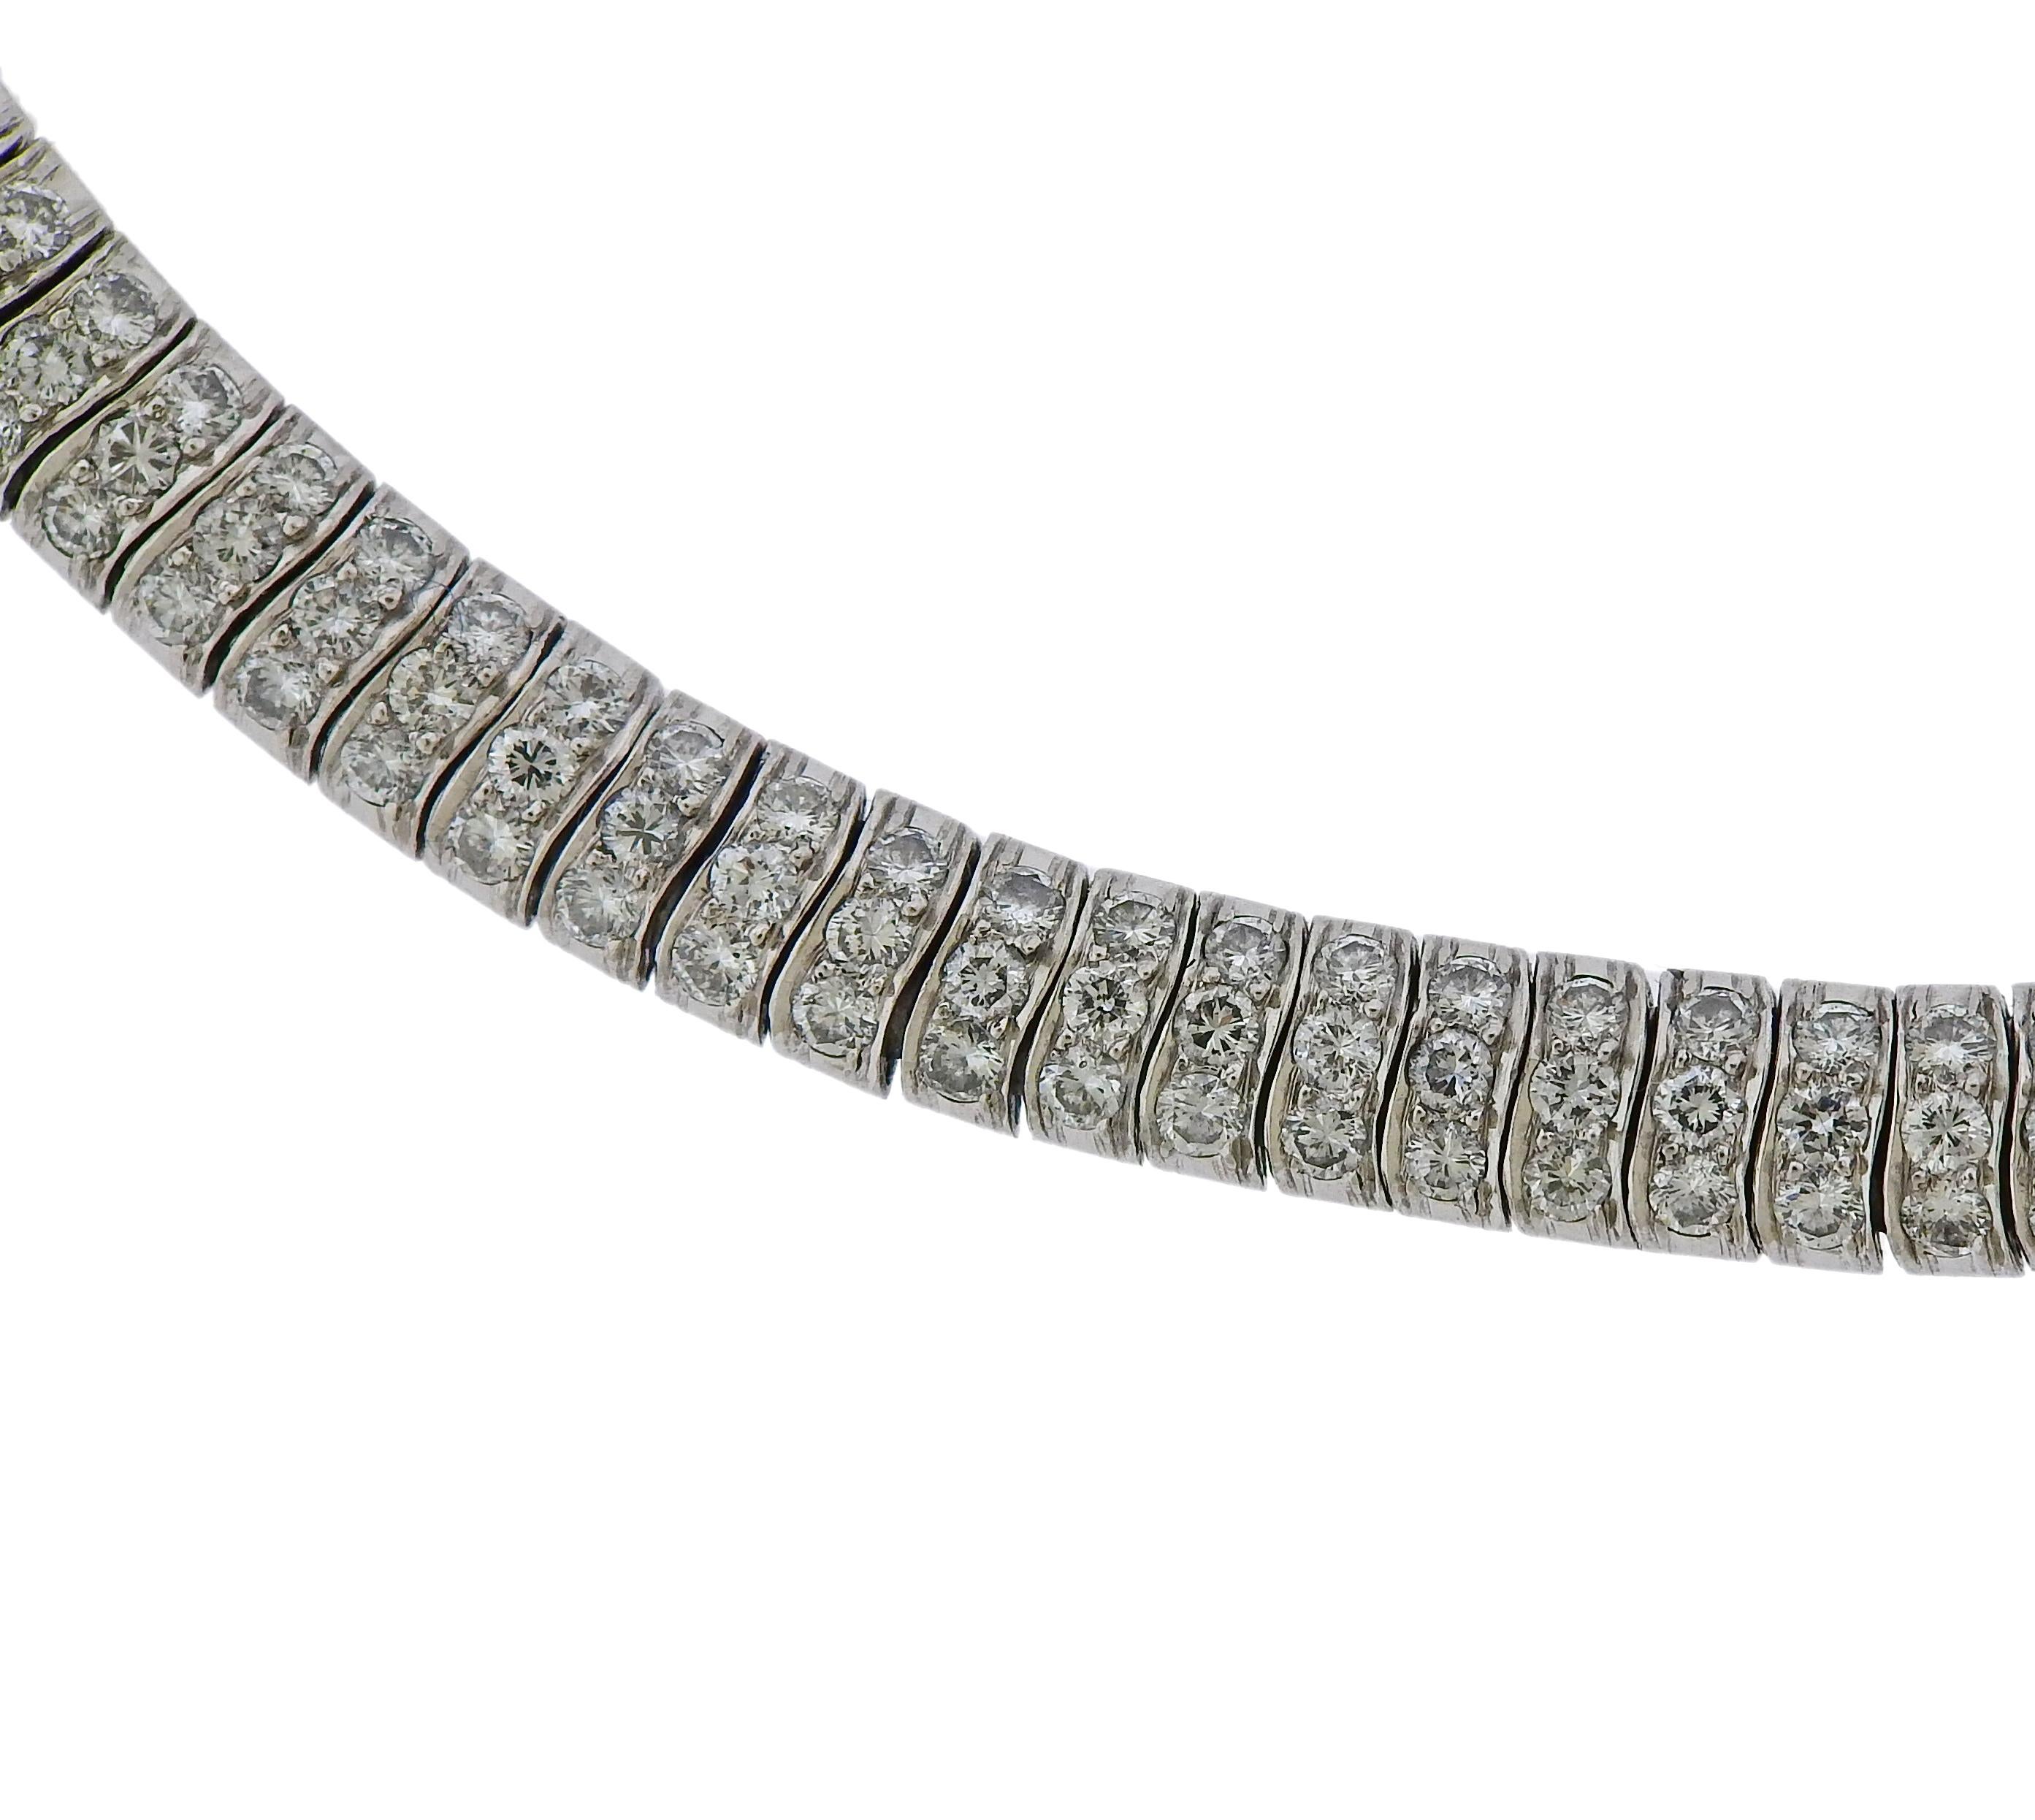 Platinum two bracelets or a necklace suite. All set with approx. 5.75ctw in diamonds. Necklace measures 15 7/8